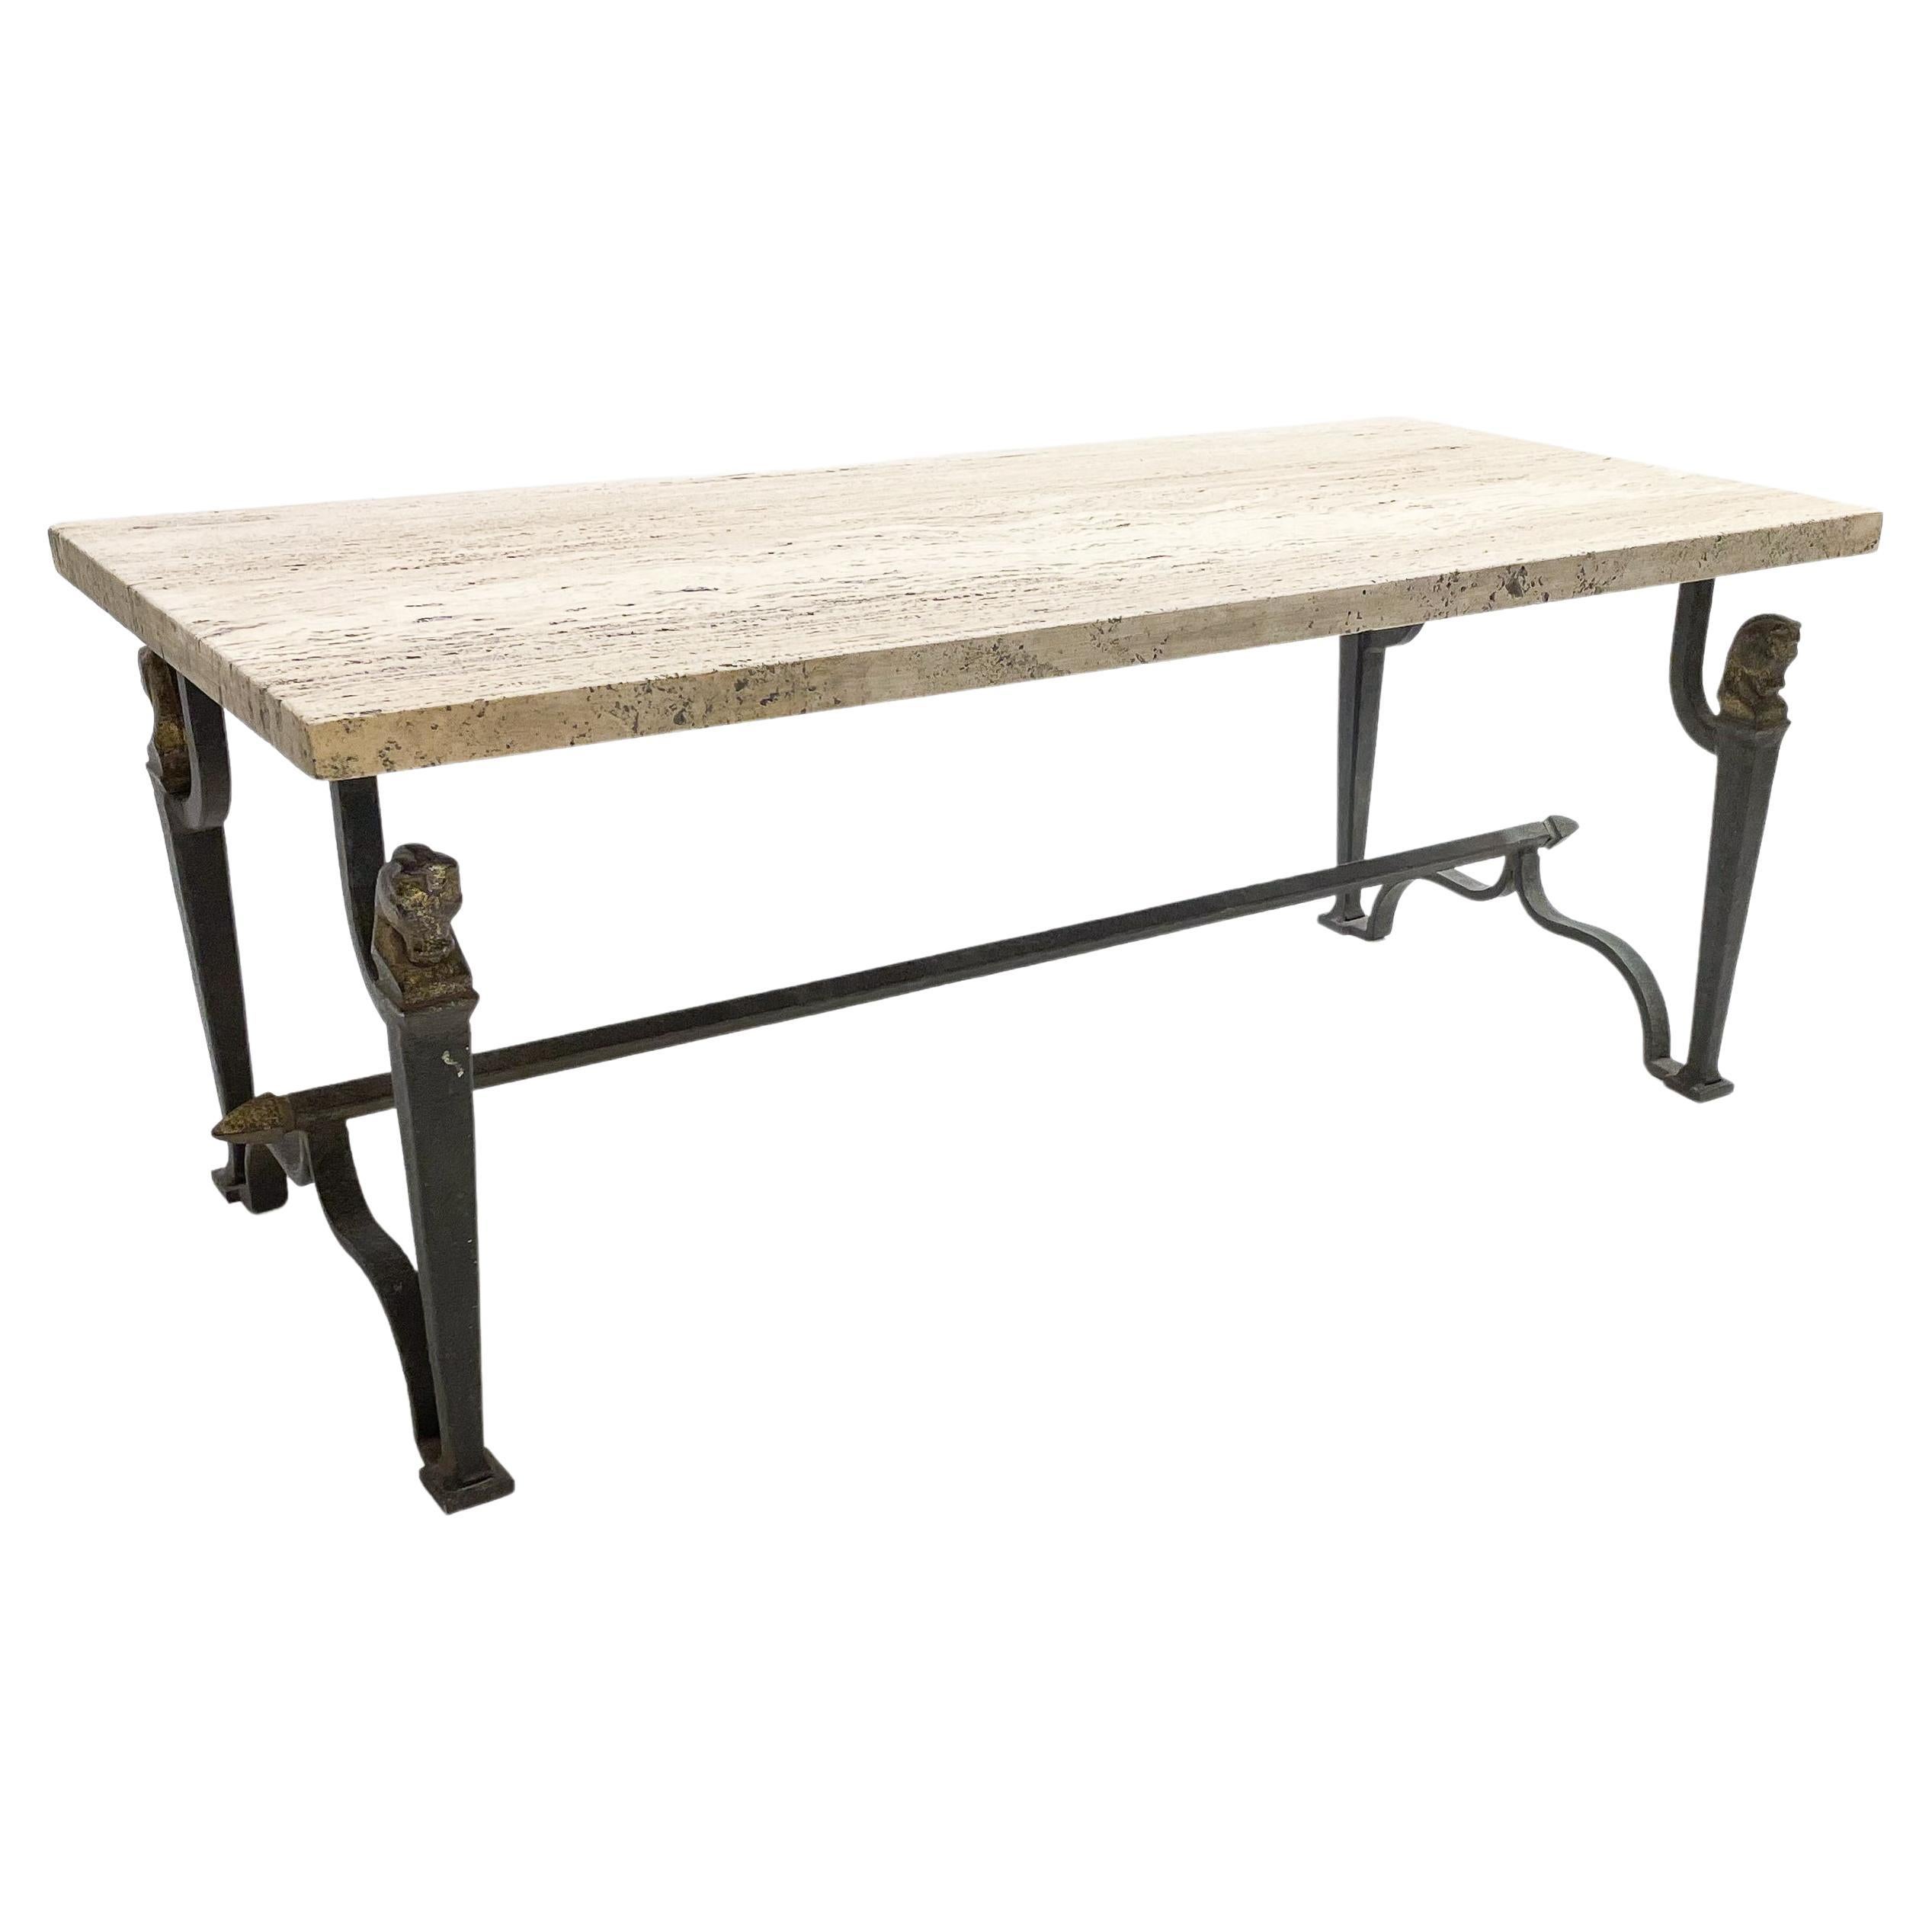 Mid-Century Wrought Iron and Travertine Coffee Table, 1940s